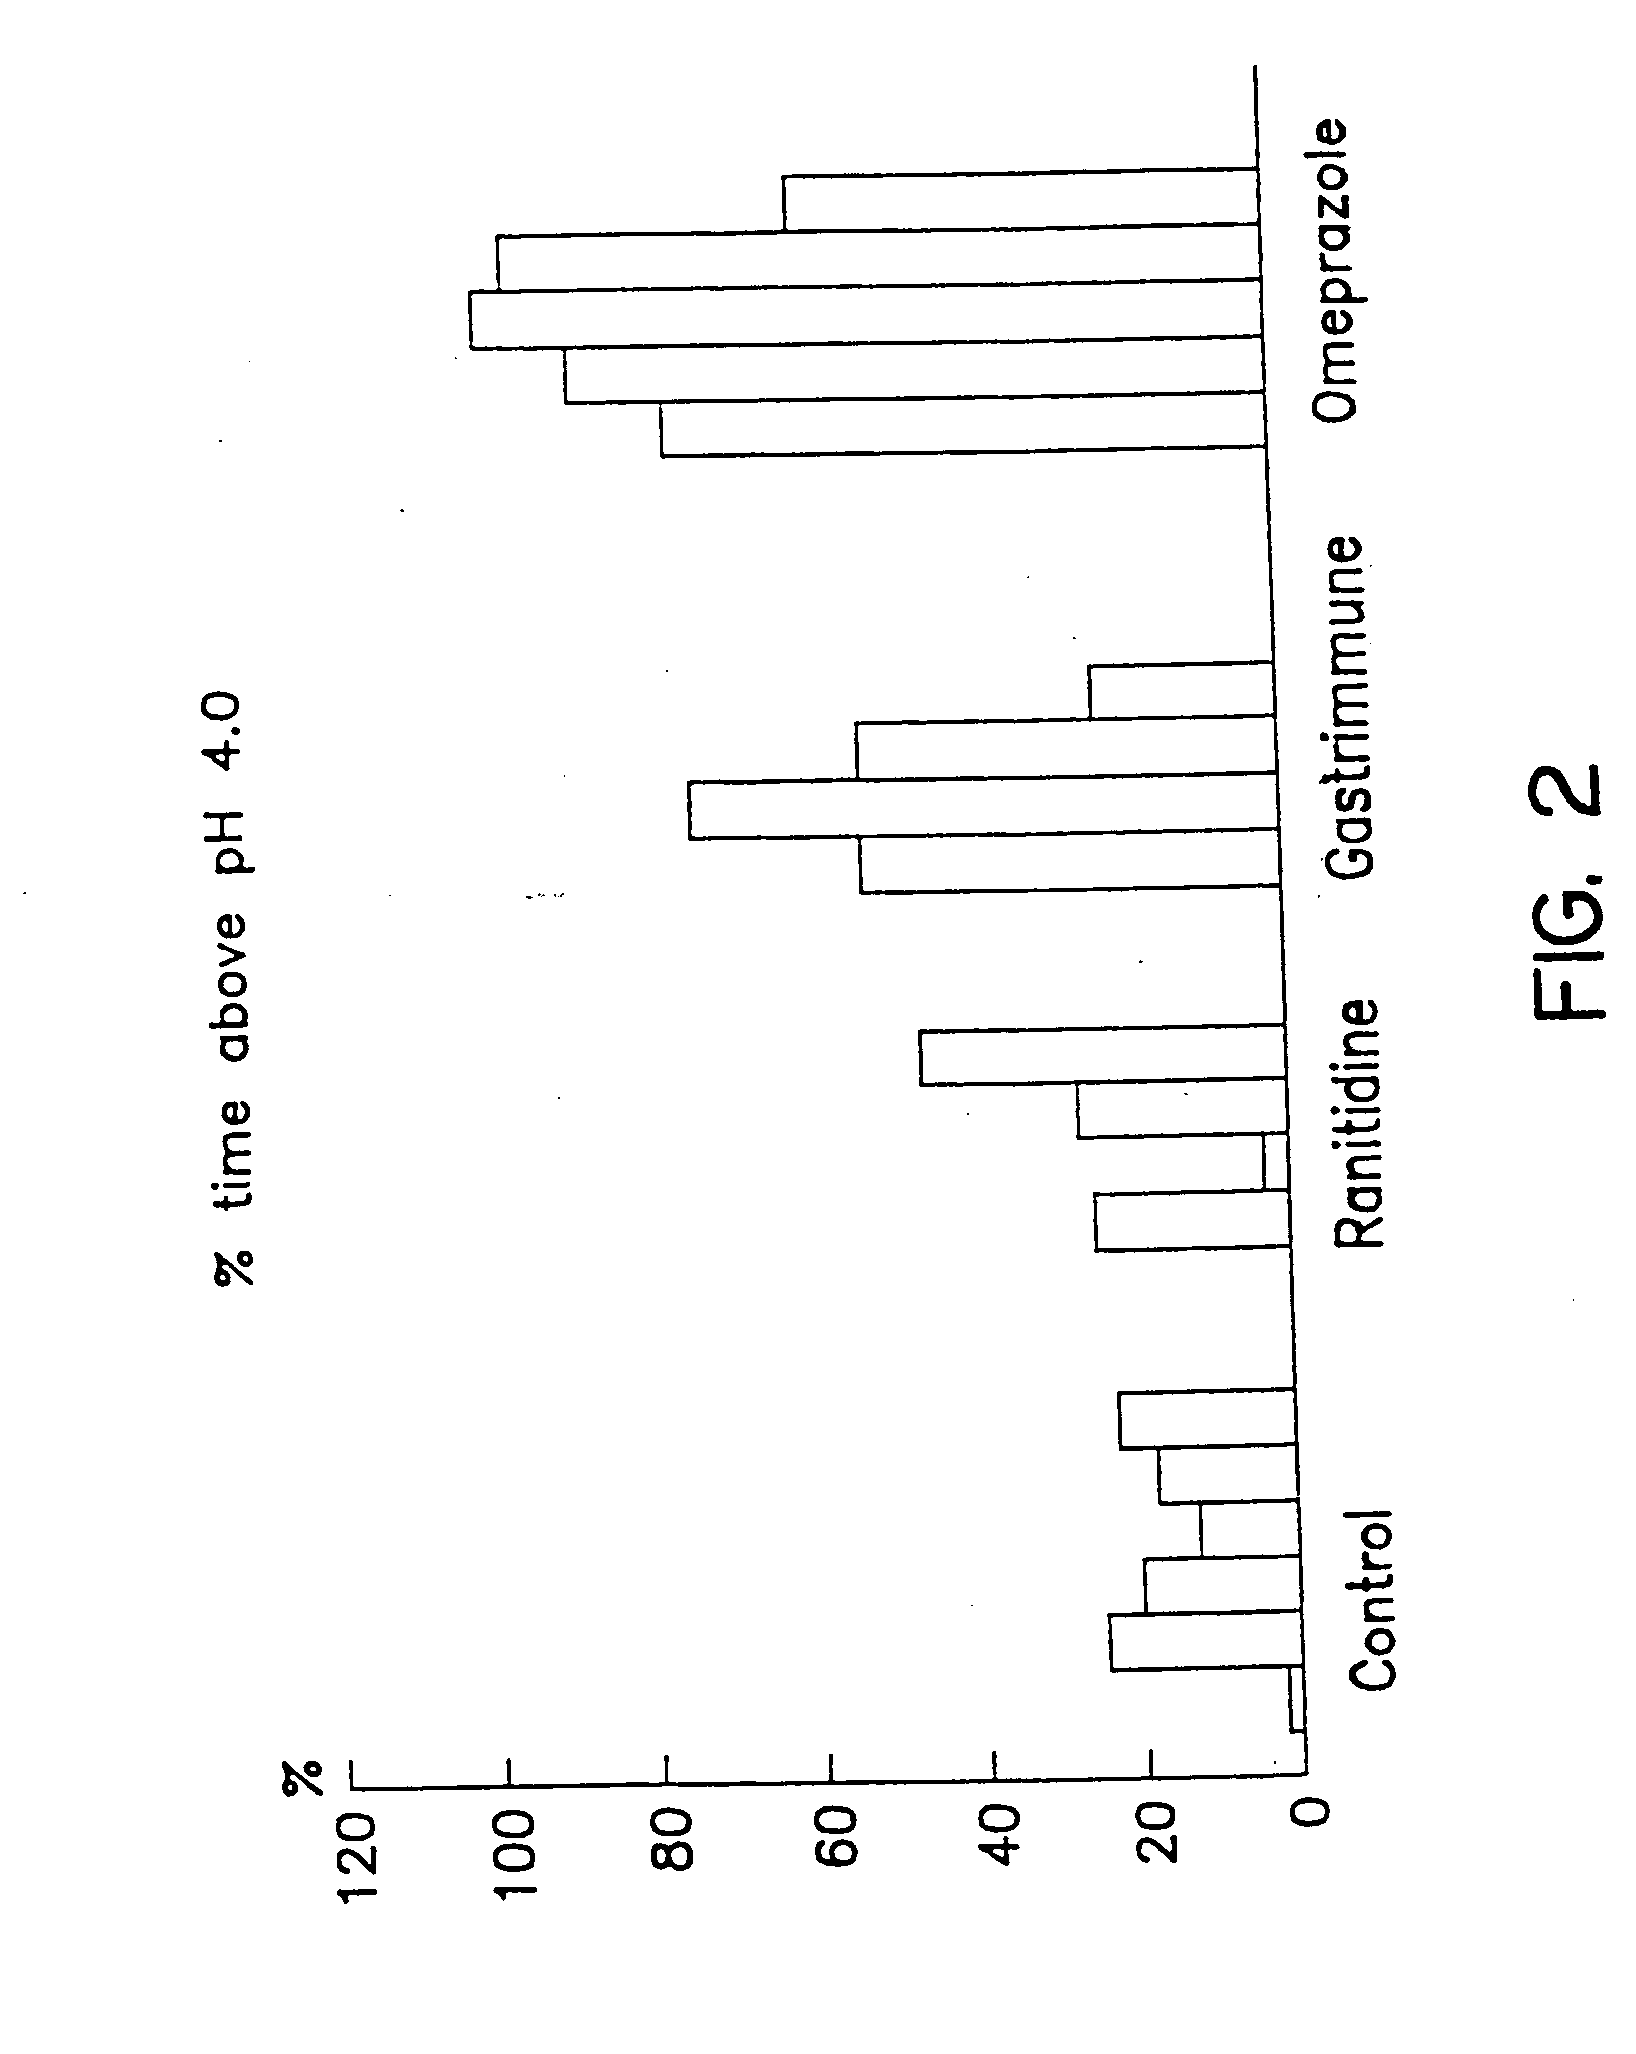 Method for the treatment of gastroesophageal reflux disease